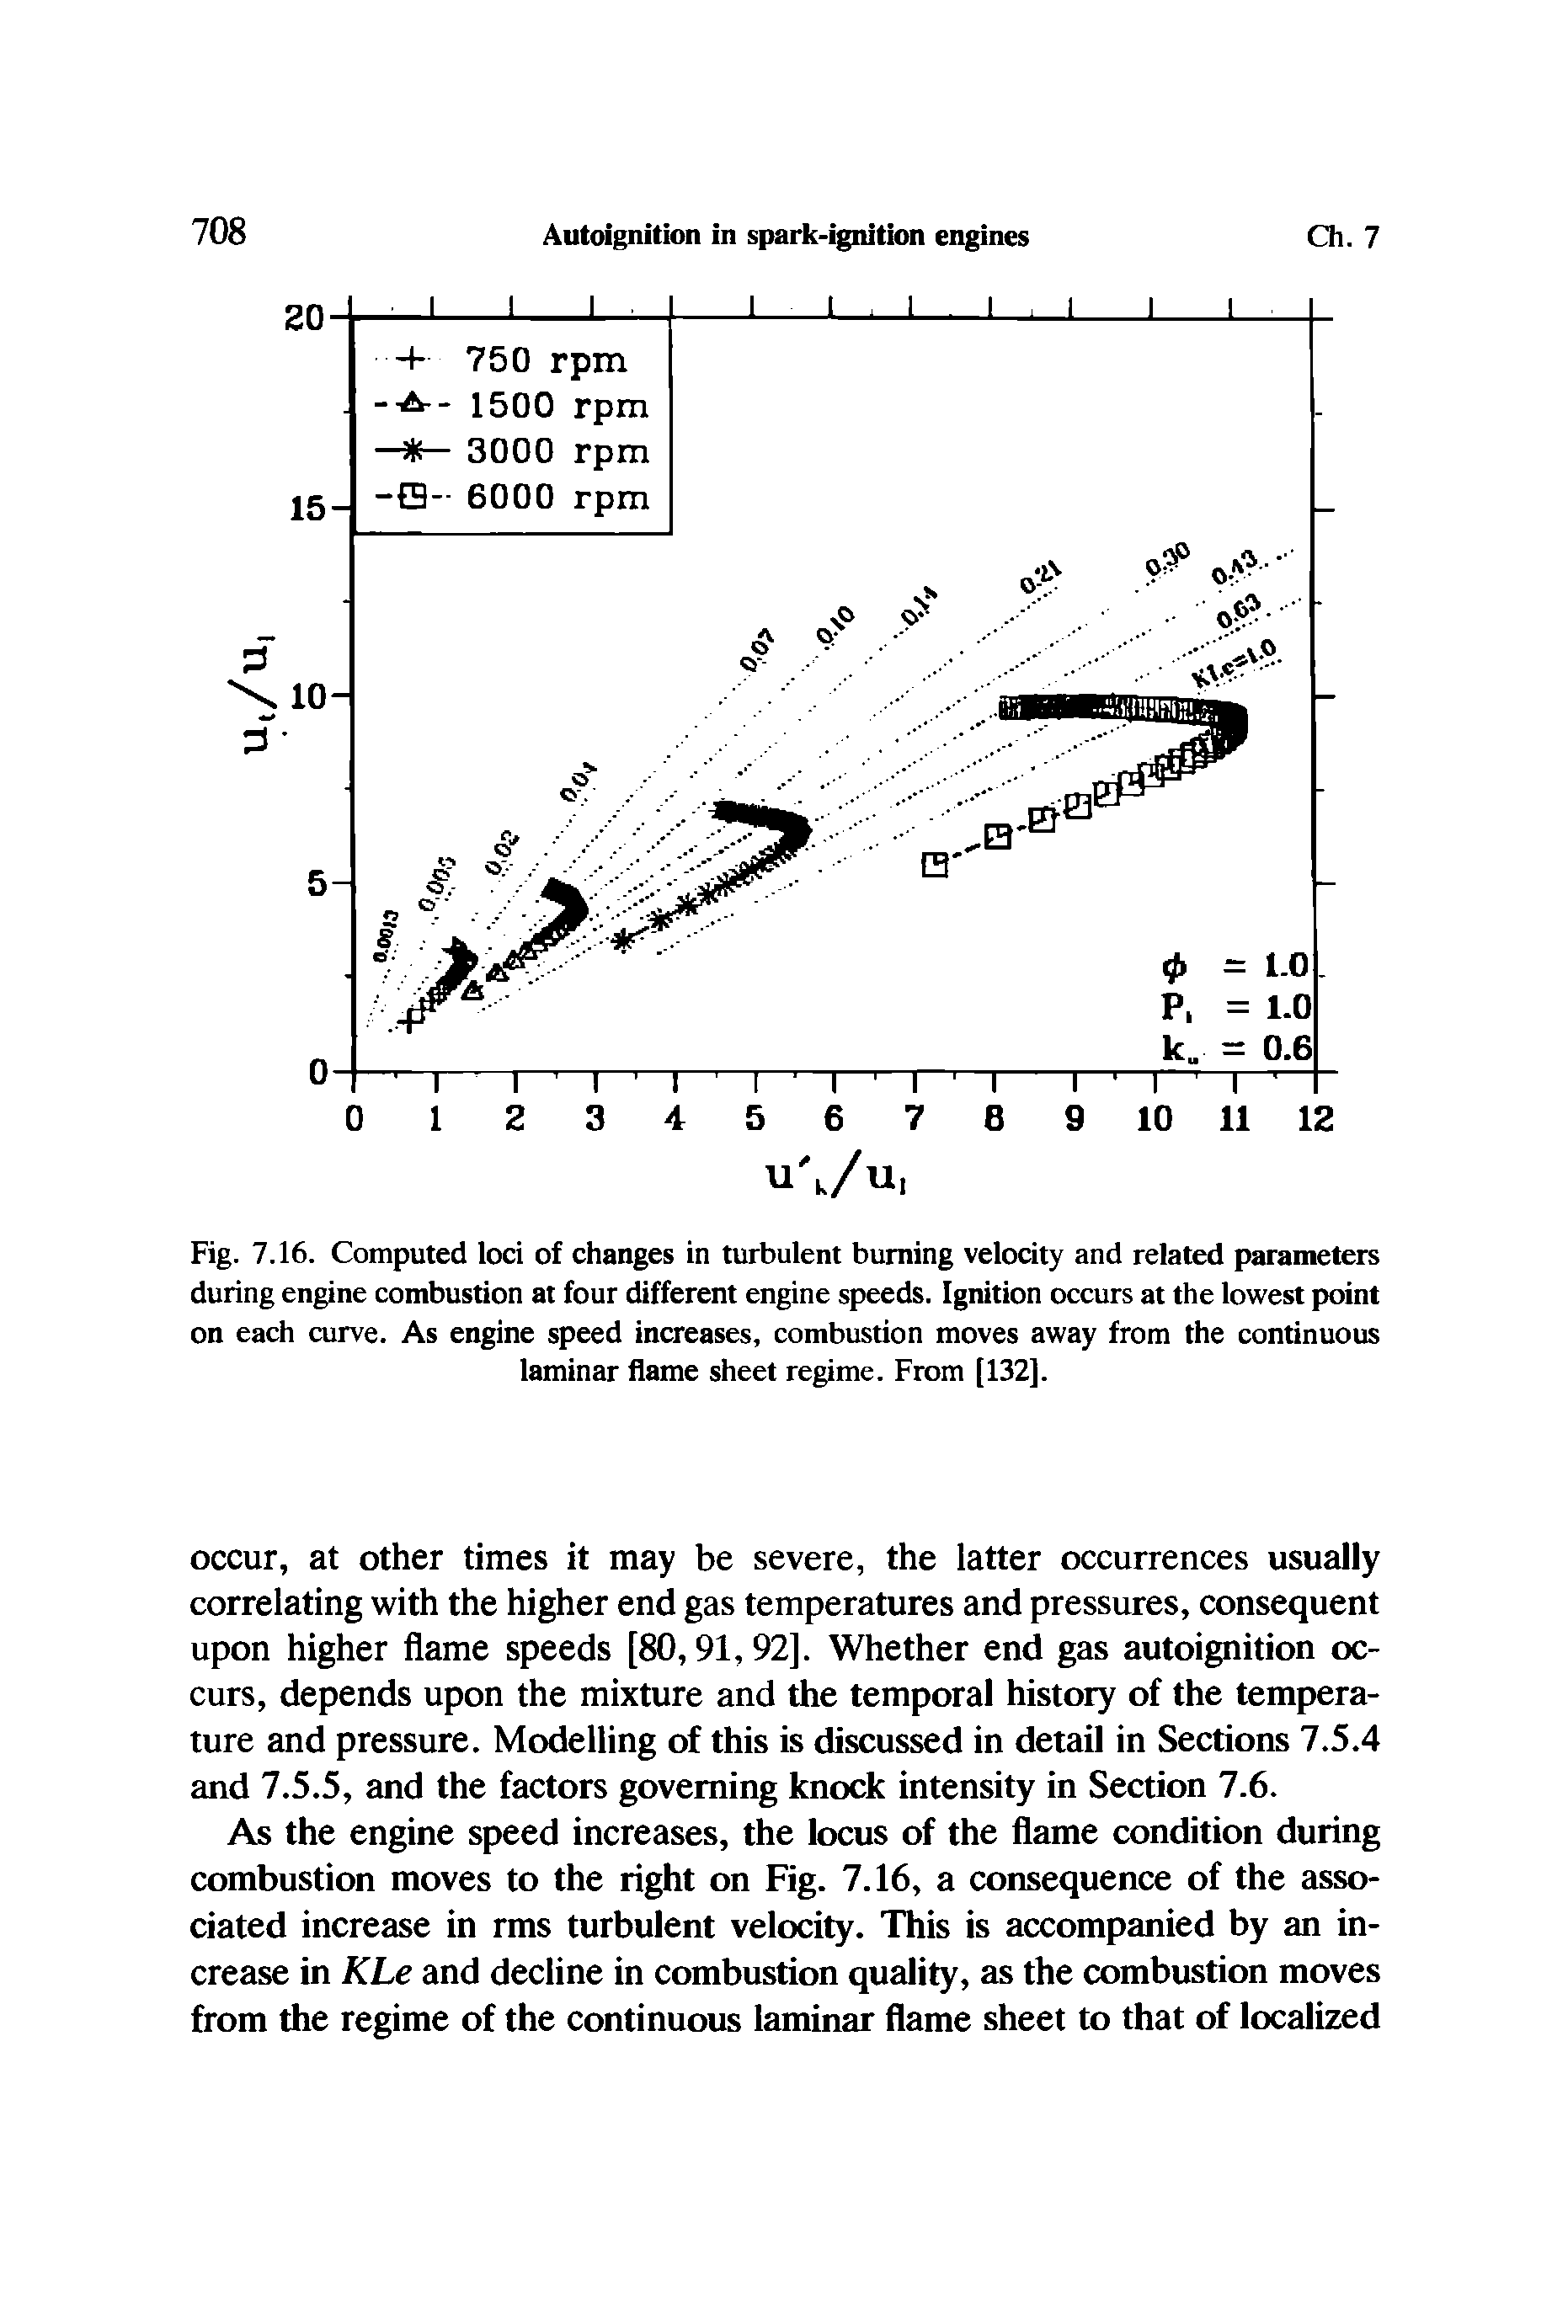 Fig. 7.16. Computed loci of changes in turbulent burning velocity and related parameters during engine combustion at four different engine speeds. Ignition occurs at the lowest point on each curve. As engine speed increases, combustion moves away from the continuous laminar flame sheet regime. From [132].